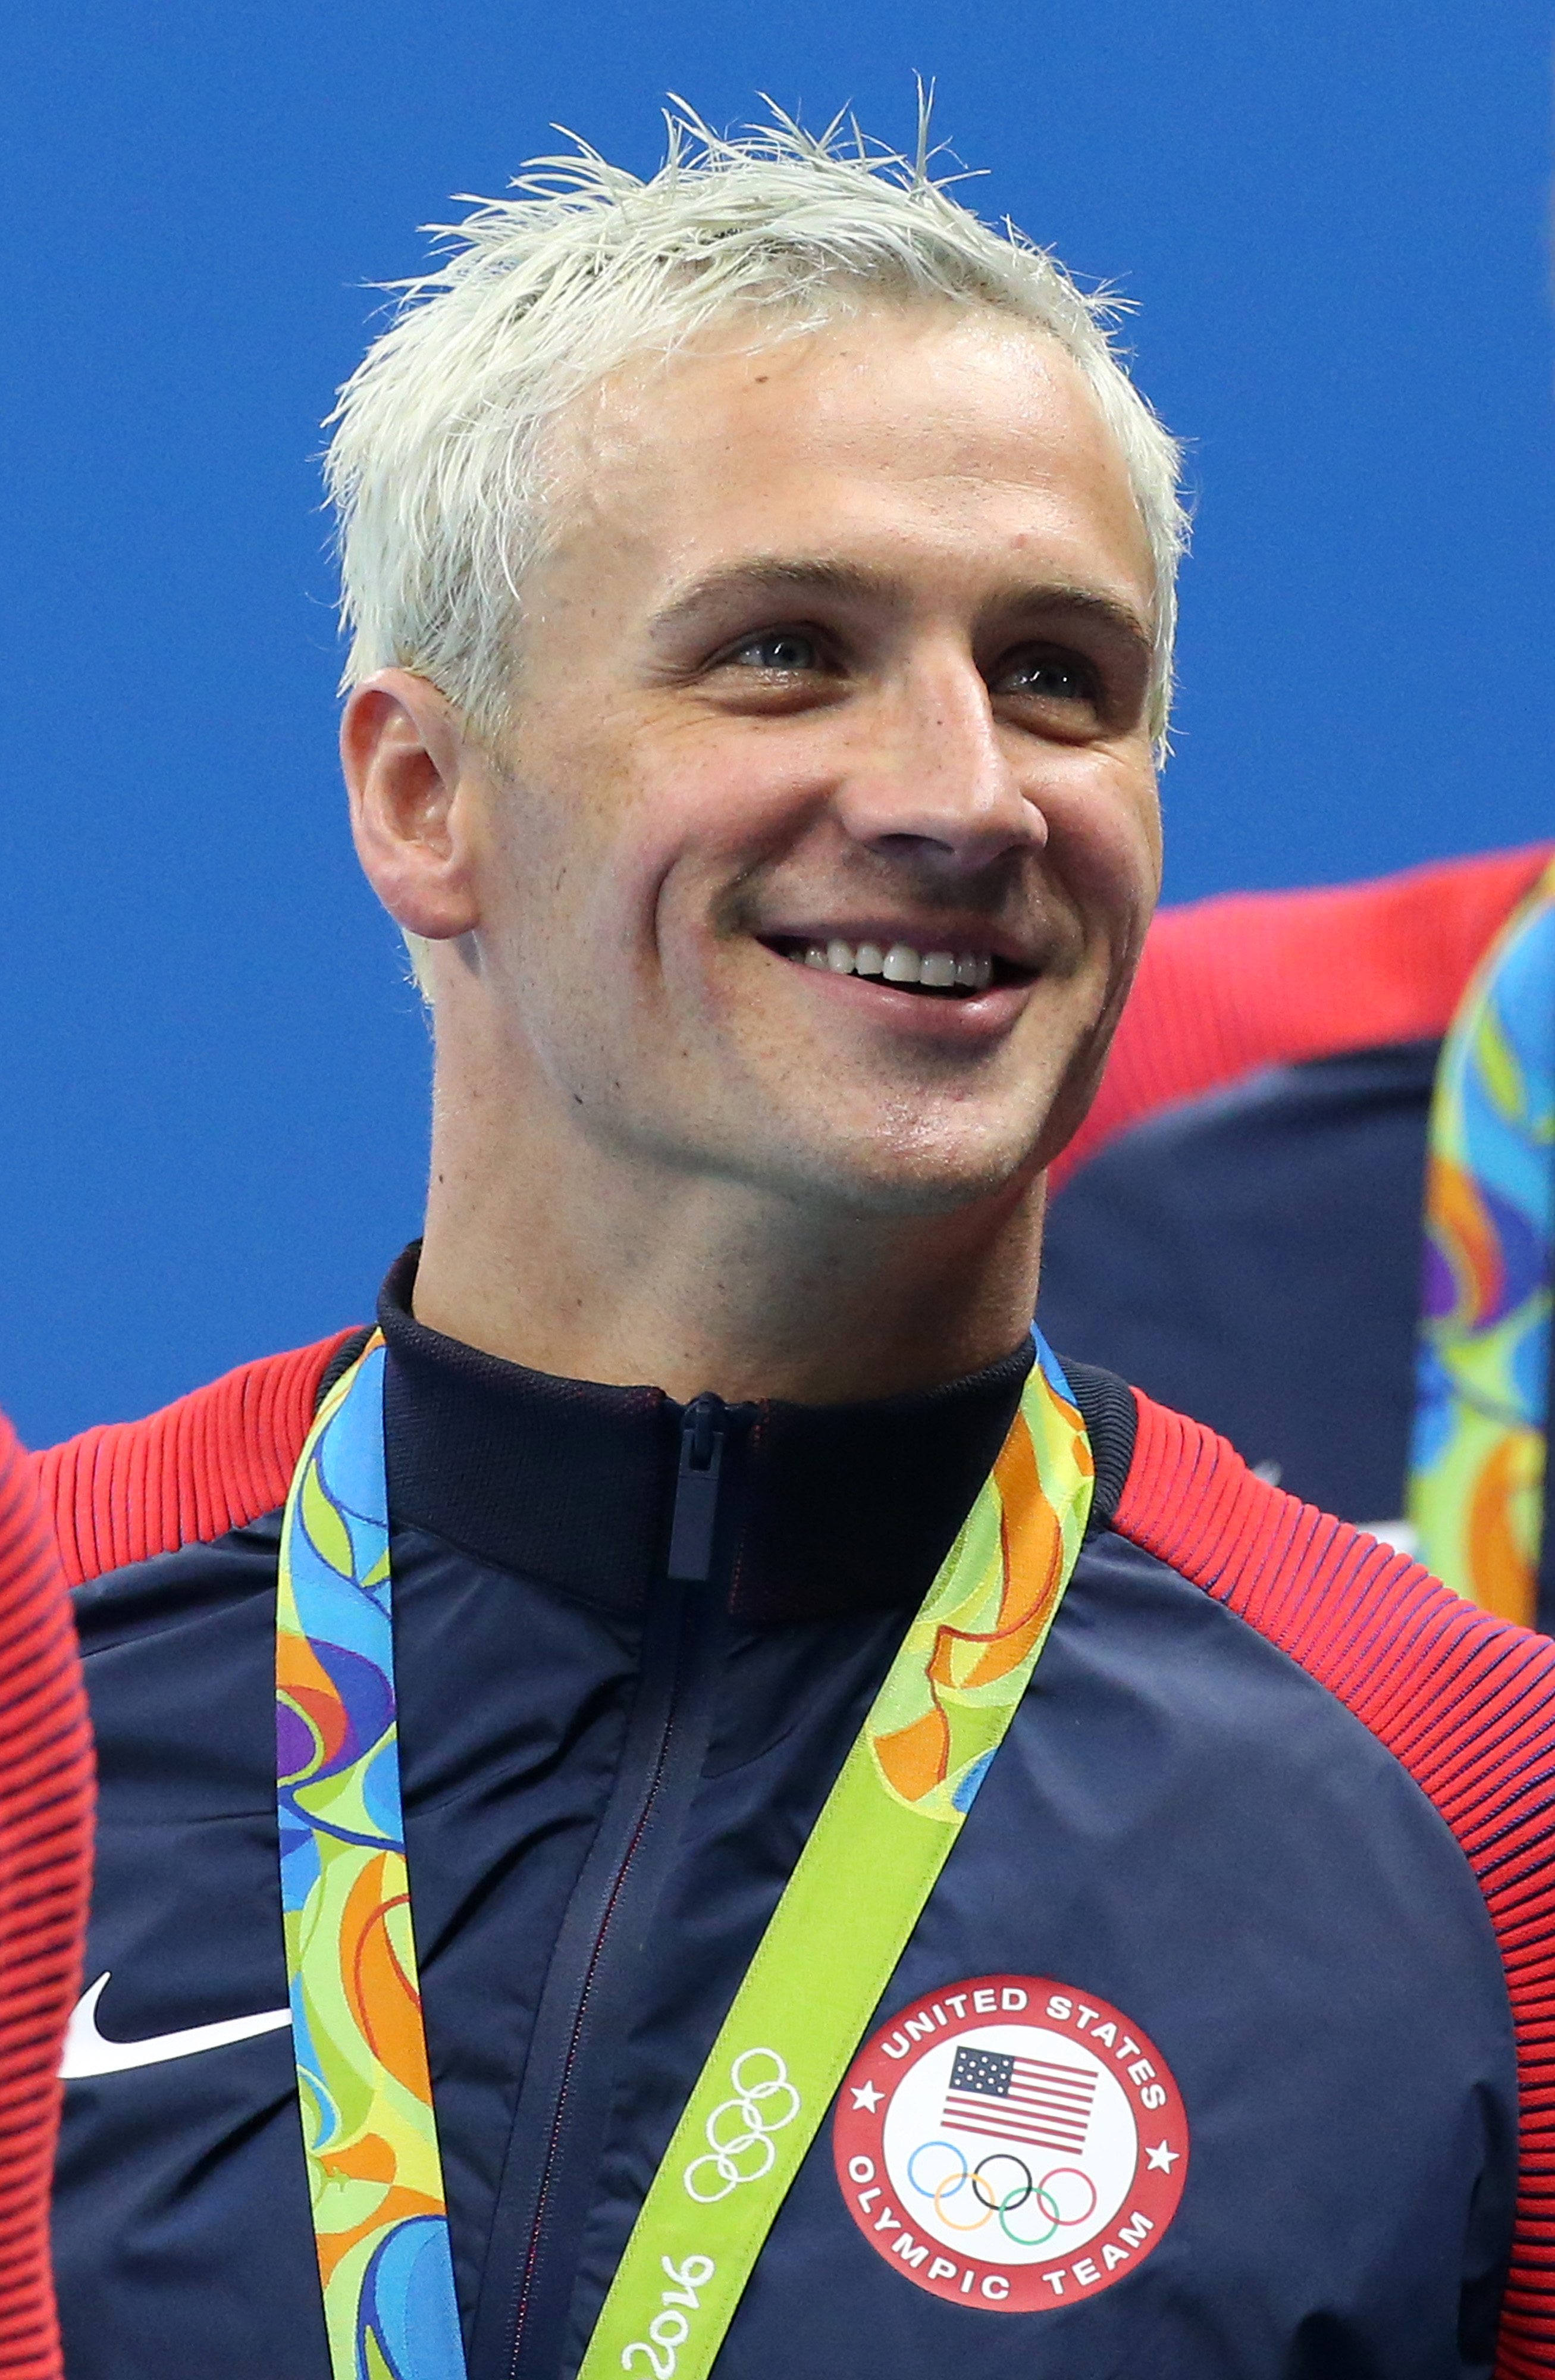 Men With Bleached Hair: Ryan Lochte, Lionel Messi, | Time